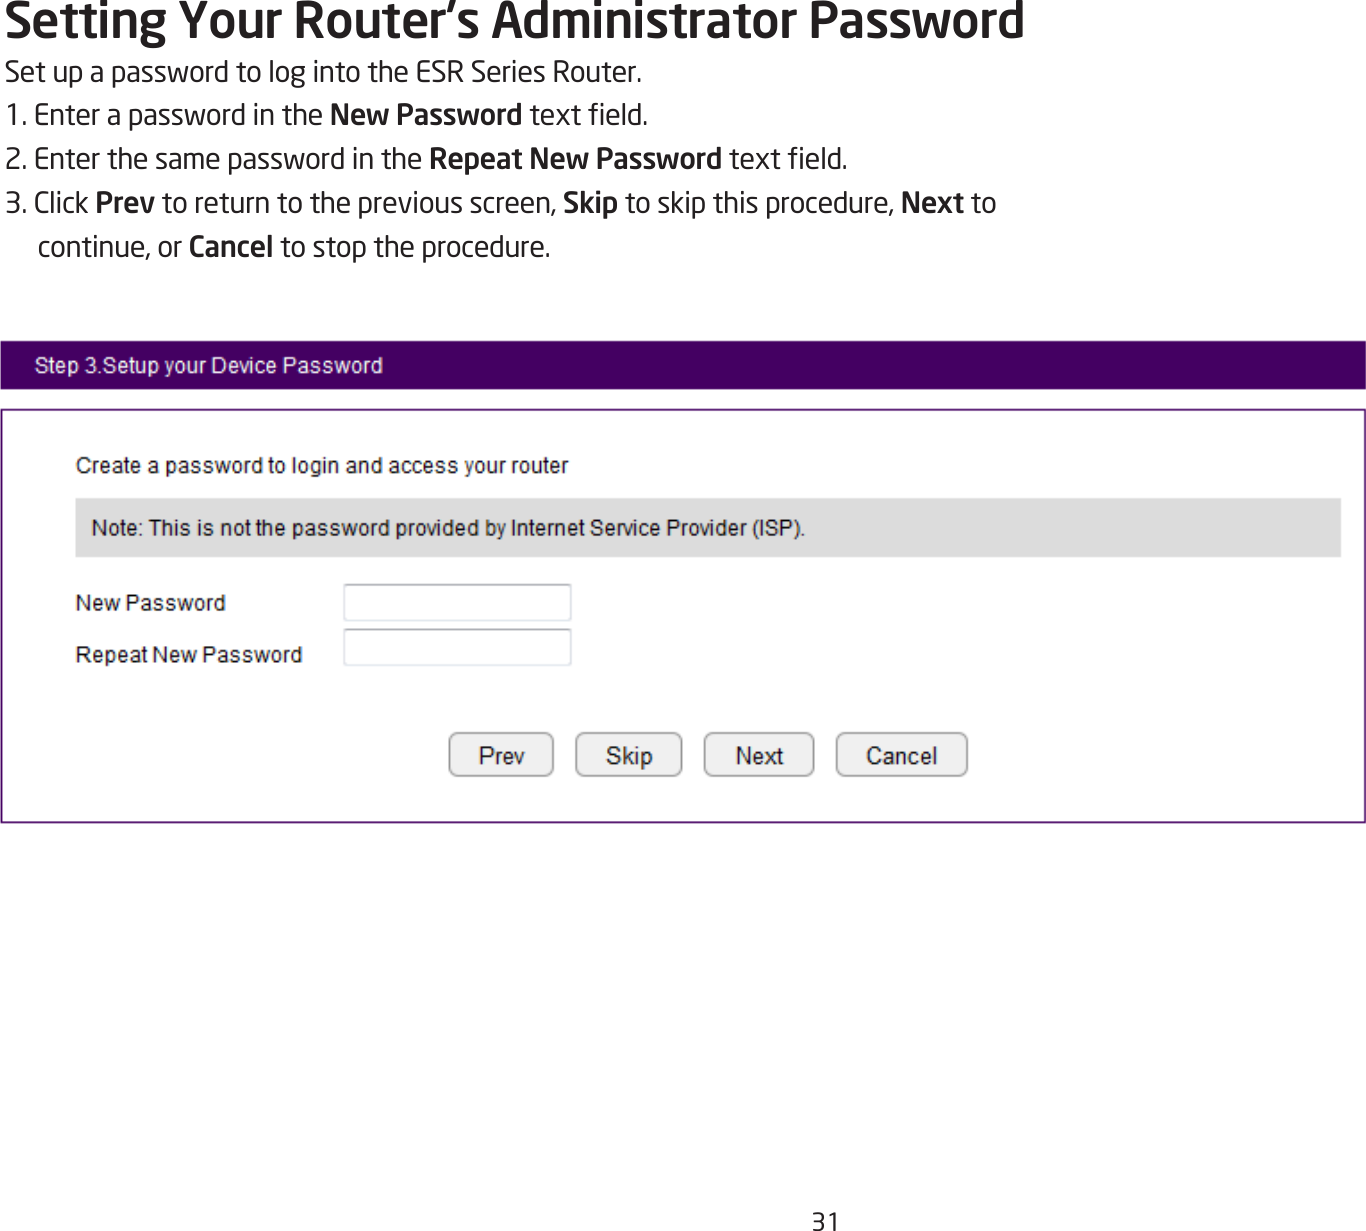 31Setting Your Router’s Administrator PasswordSetupapasswordtologintotheESRSeriesRouter.1.EnterapasswordintheNew Passwordtexteld.2.EnterthesamepasswordintheRepeat New Passwordtexteld.3.ClickPrev to return to the previous screen, Skip to skip this procedure, Next to continue, or Cancel to stop the procedure.